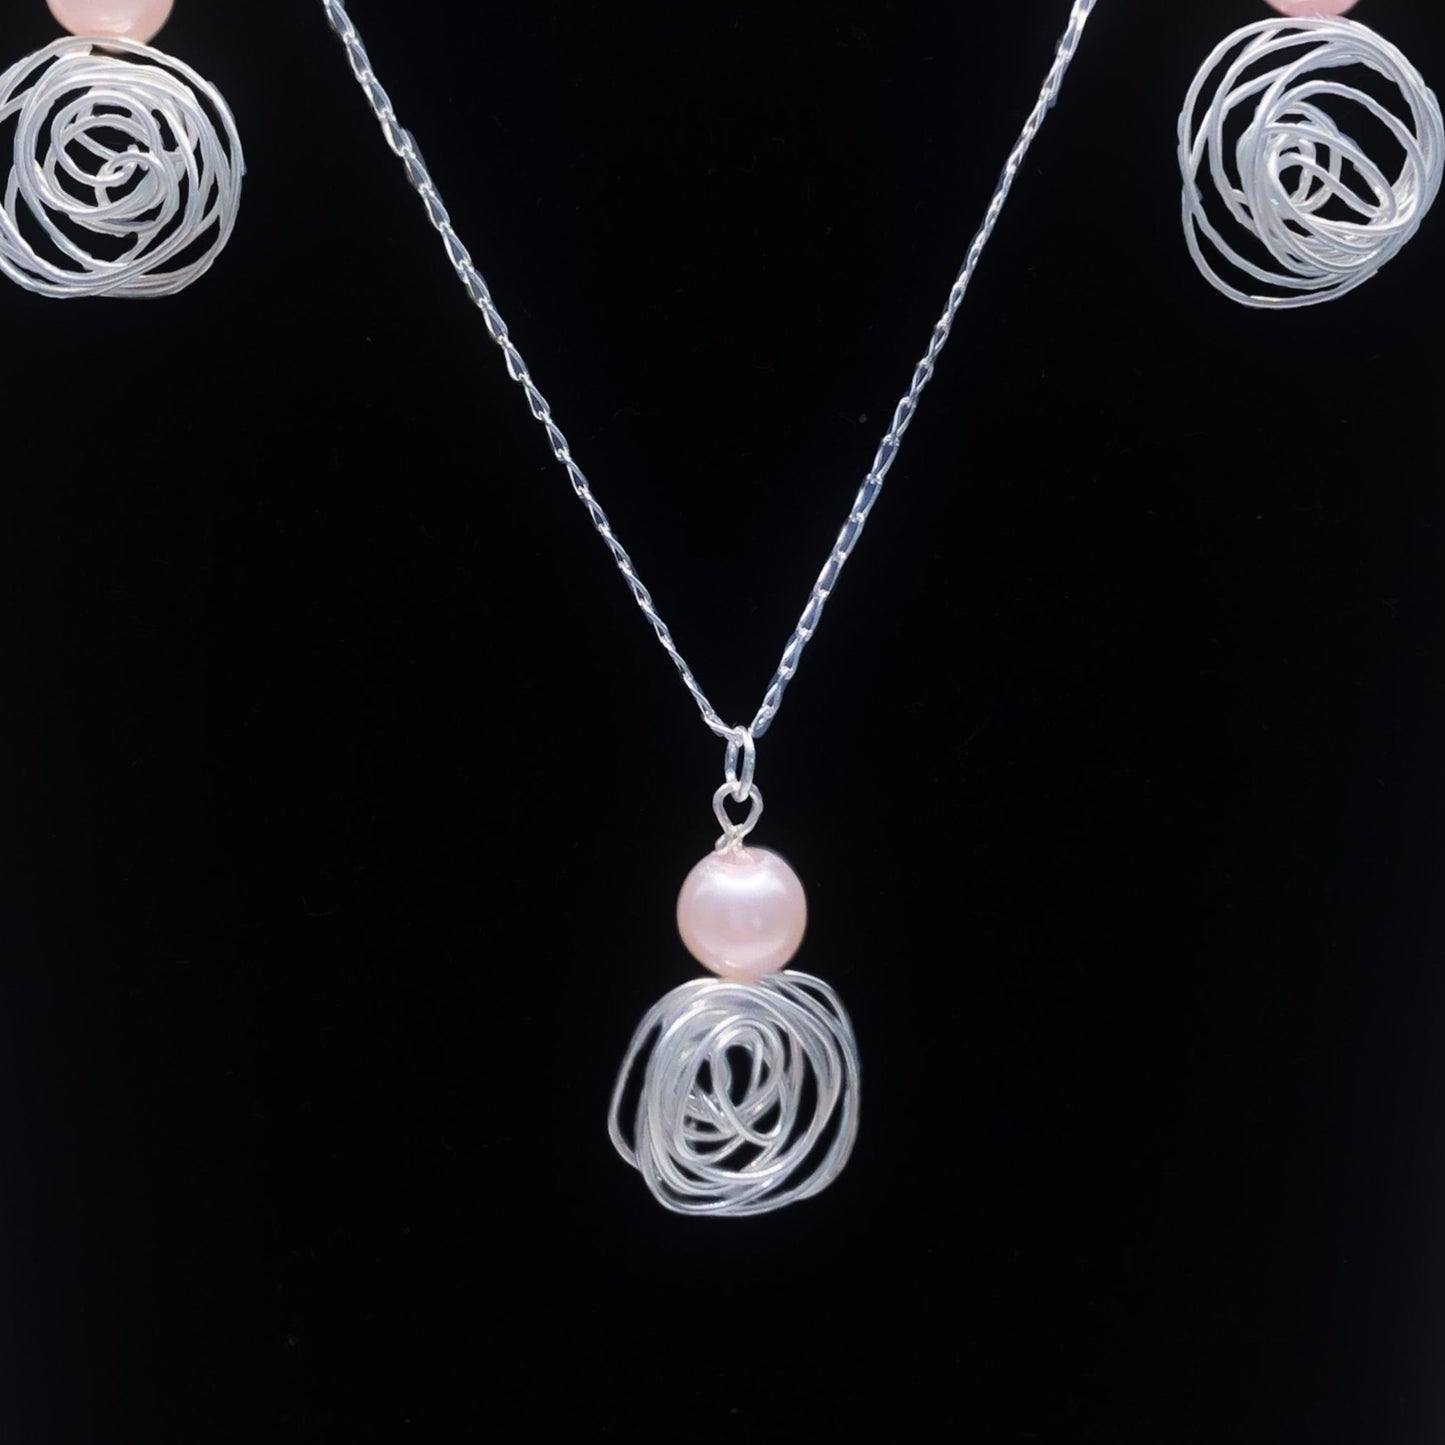 Silver and Crystal Rose Necklace